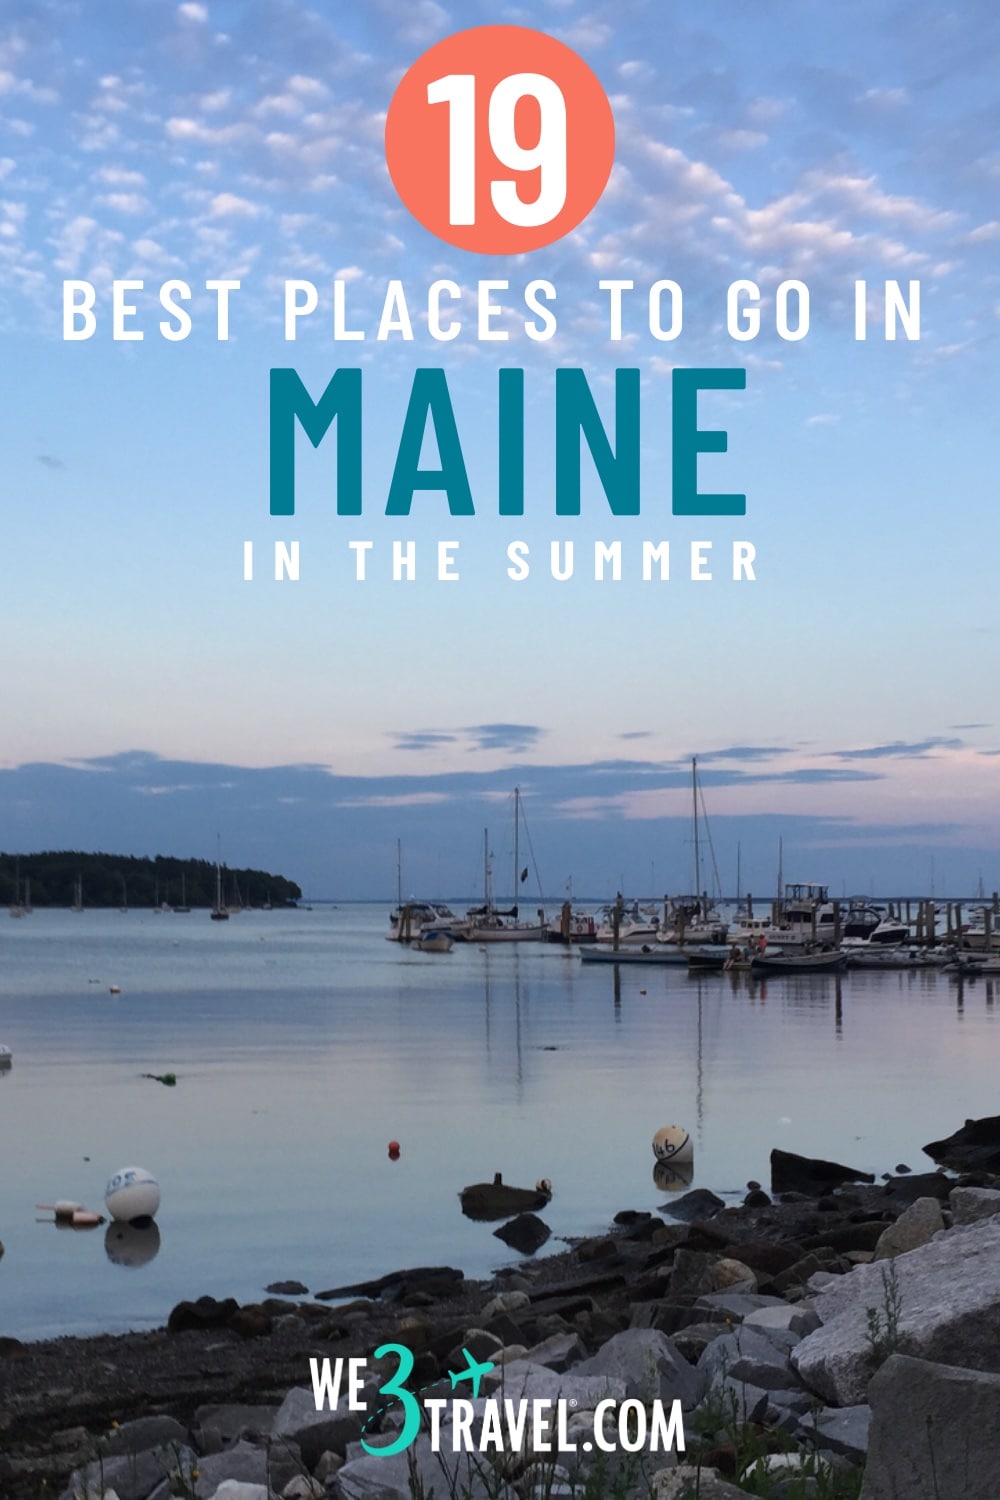 Dreaming of exploring Maine’s rocky coastlines, lighthouses, and fresh seafood on a Maine vacation? Make your Maine trip a reality, segregate from one of these weightier places to go to in Maine in the summer. Whether you are looking for a New England family vacation or a weekend getaway, Maine has something for everyone from rocky coastlines, sandy beaches, gorgeous lakes, and climbable mountains.